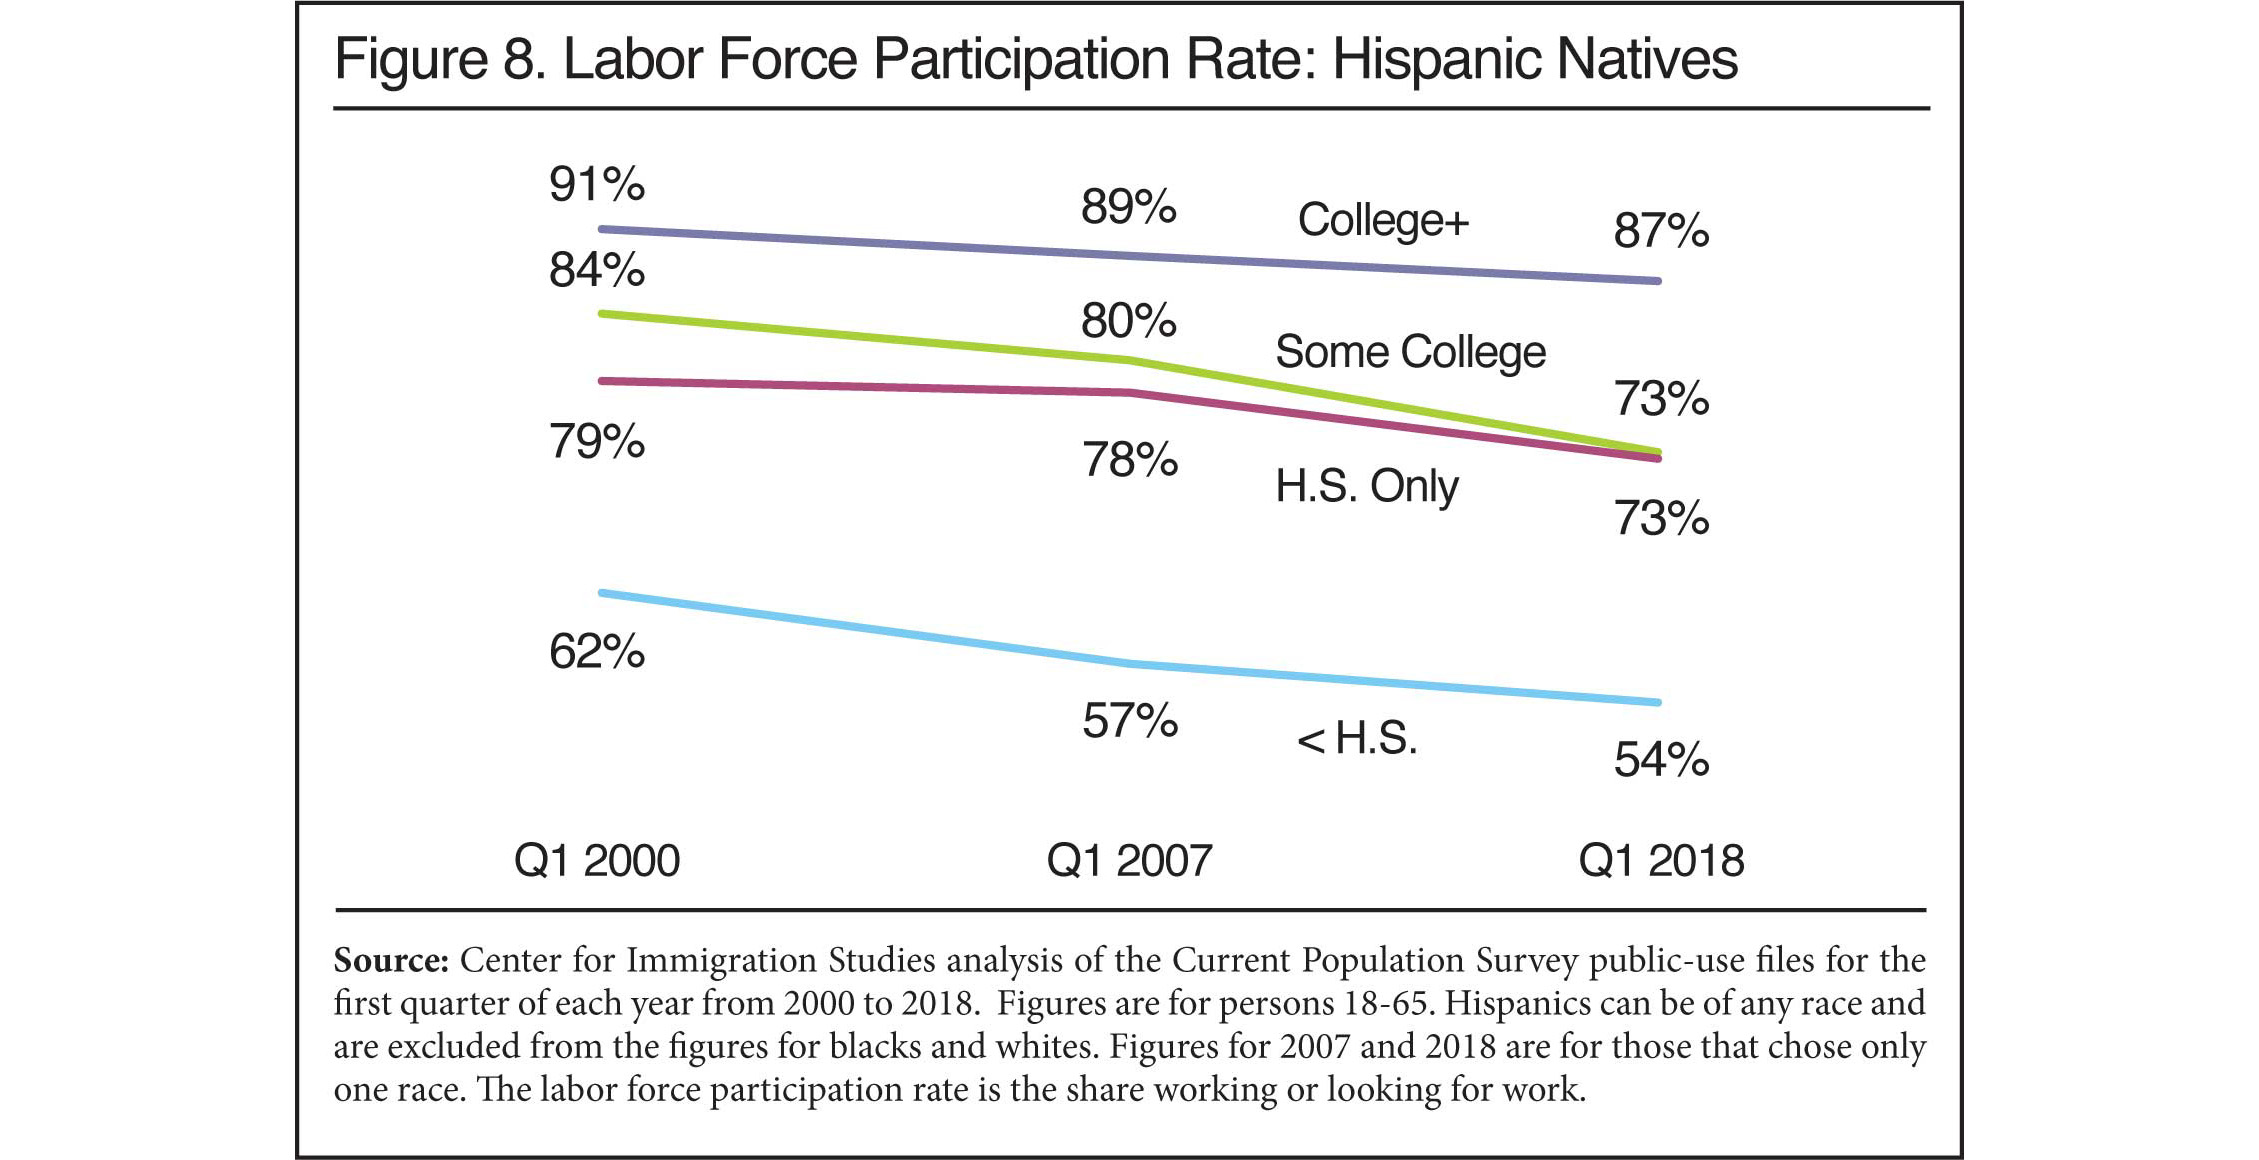 Graph: Labor Force Participation Rate for Hispanic Natives, 2000 to 2018